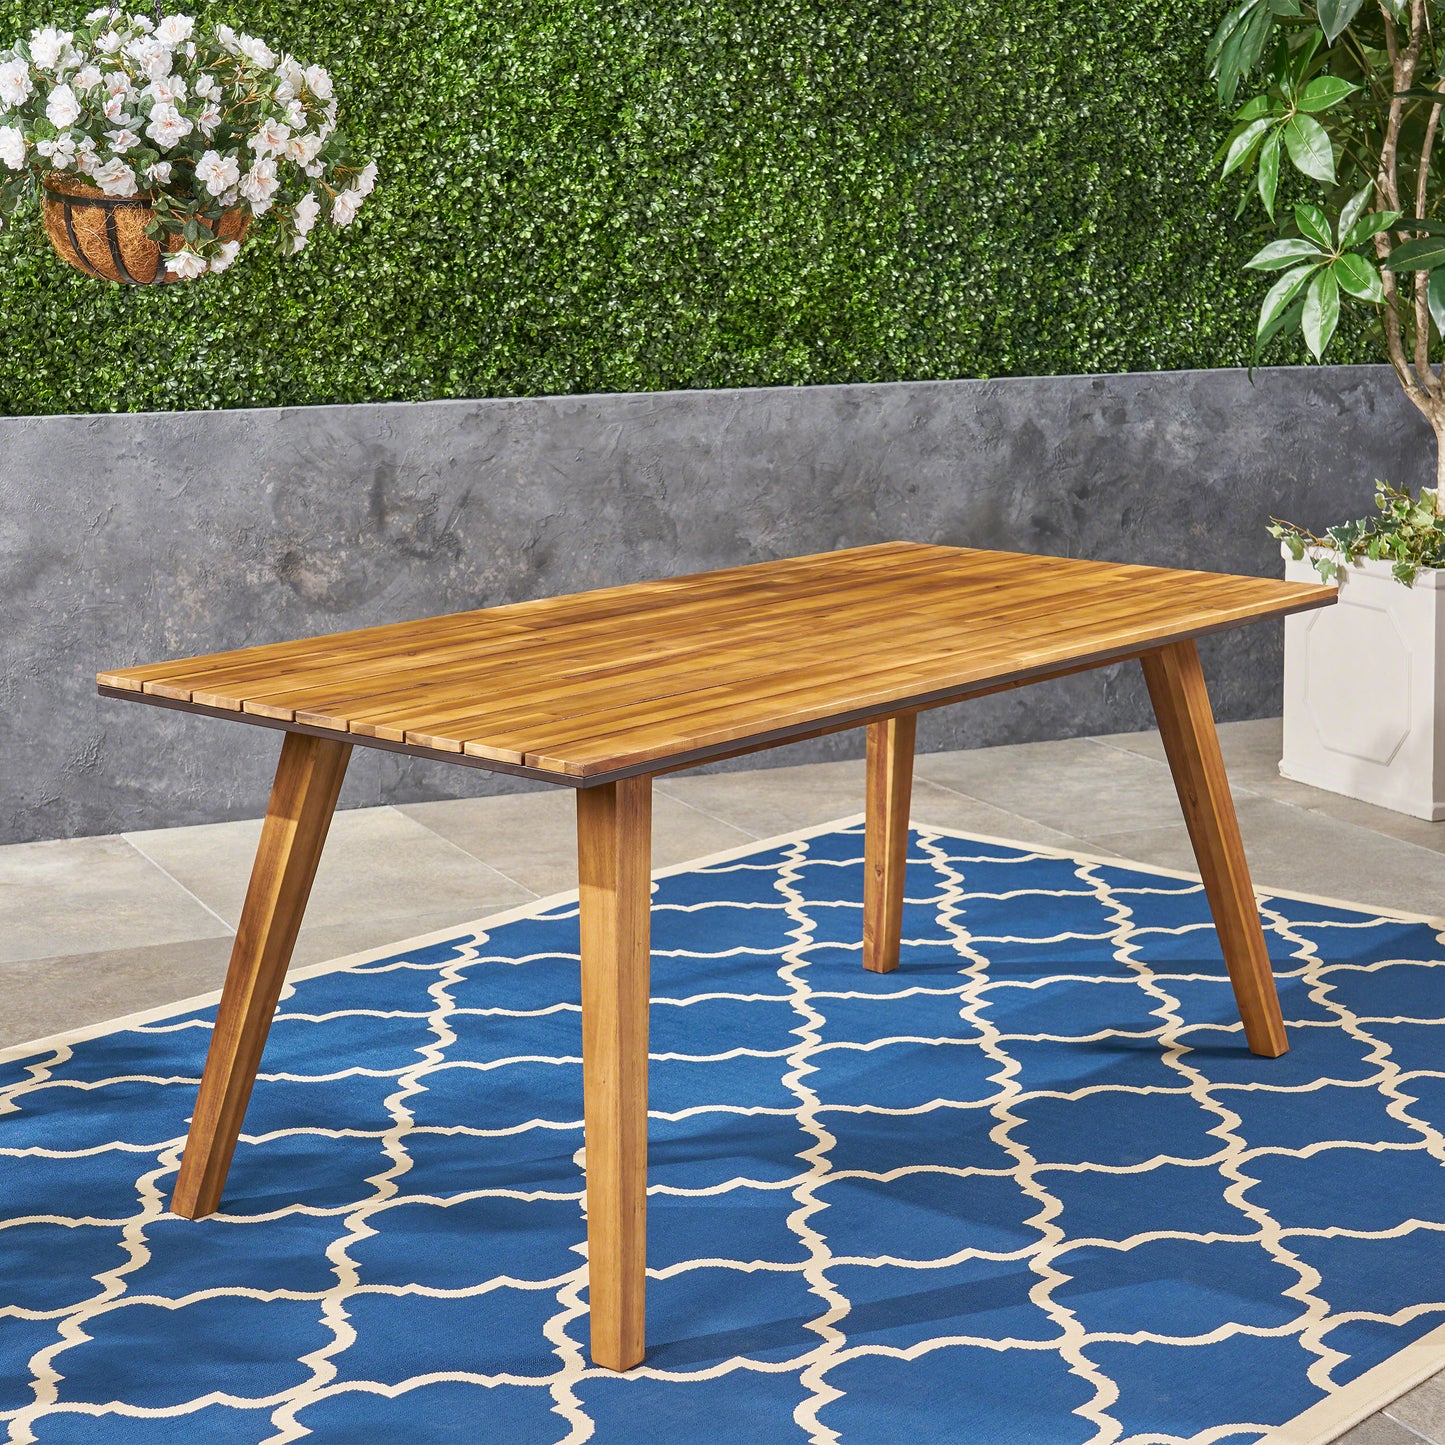 Paul Outdoor 71-inch Acacia Wood Dining Table, Teak Finish